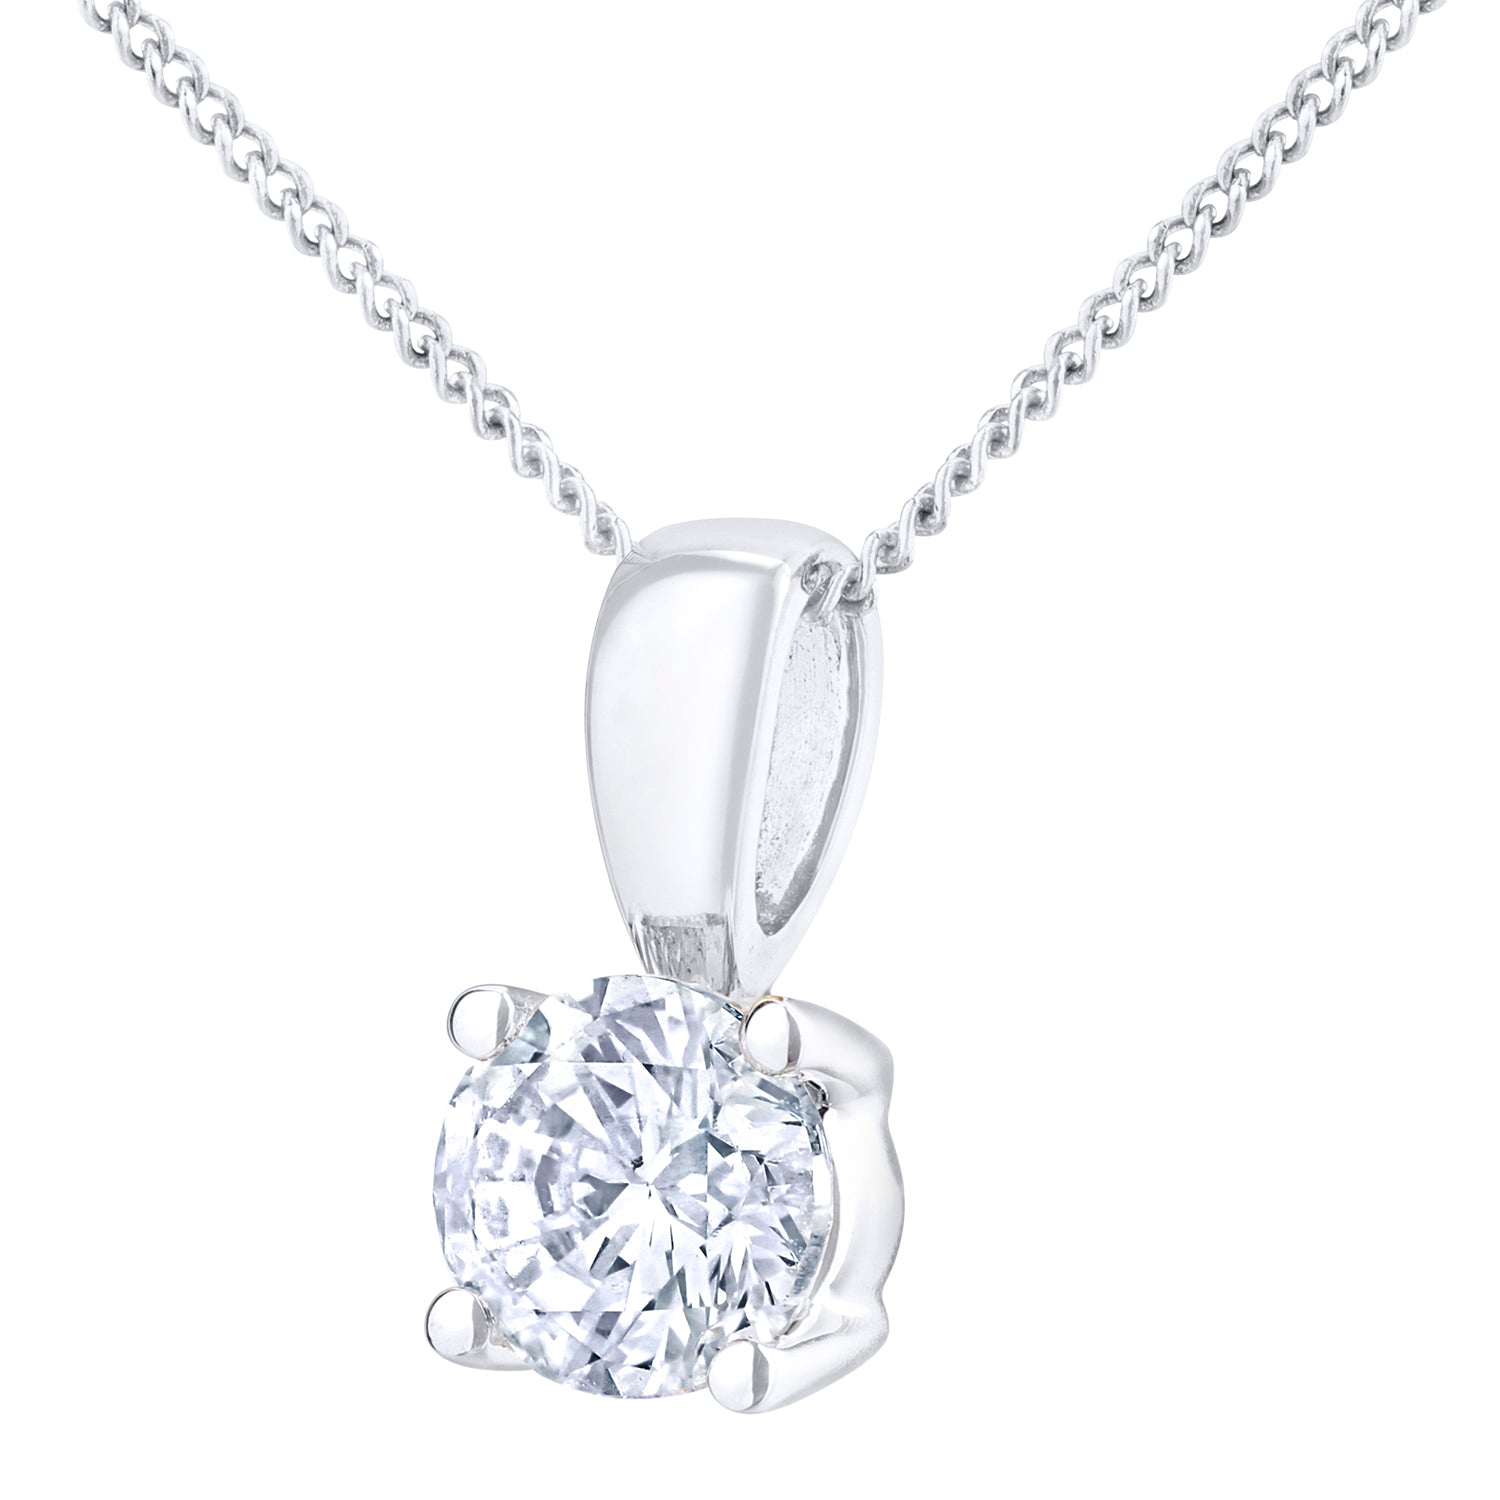 18ct White Gold  3/4ct Diamond Solitaire Pendant Necklace 18 inch - PP0AXL4194W18HSI